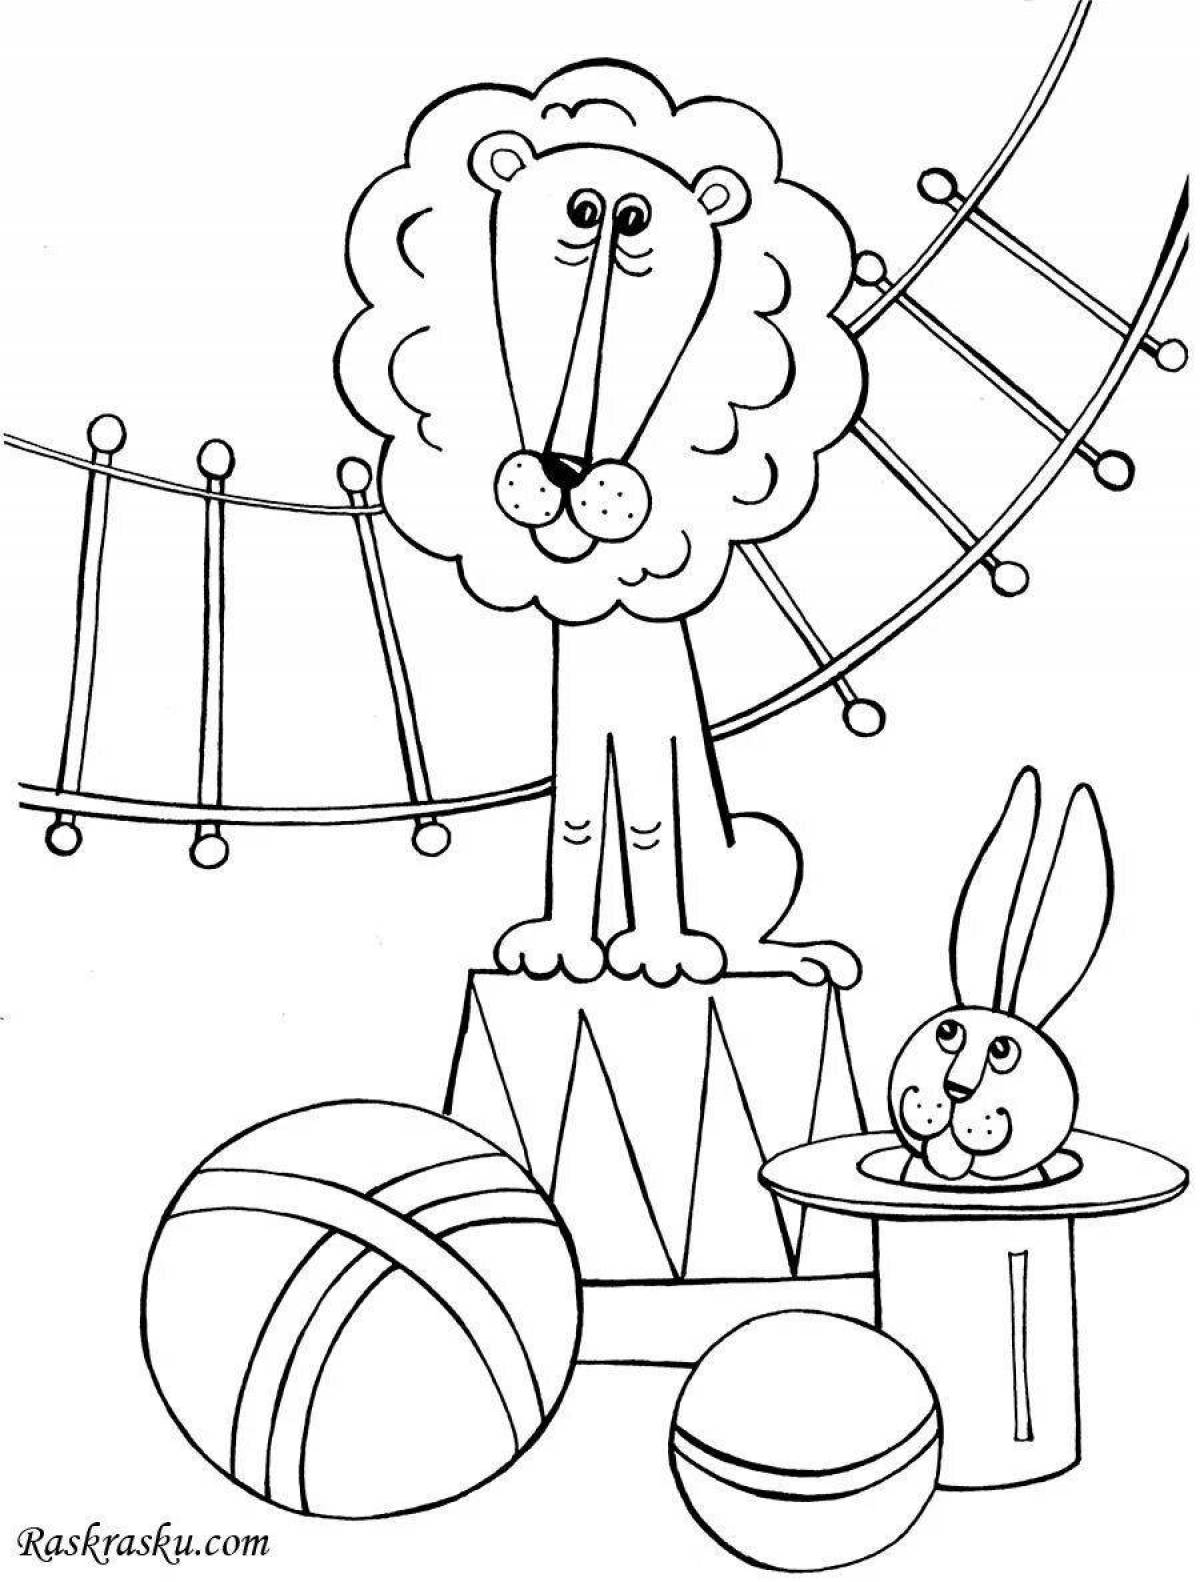 Fairytale circus arena coloring page